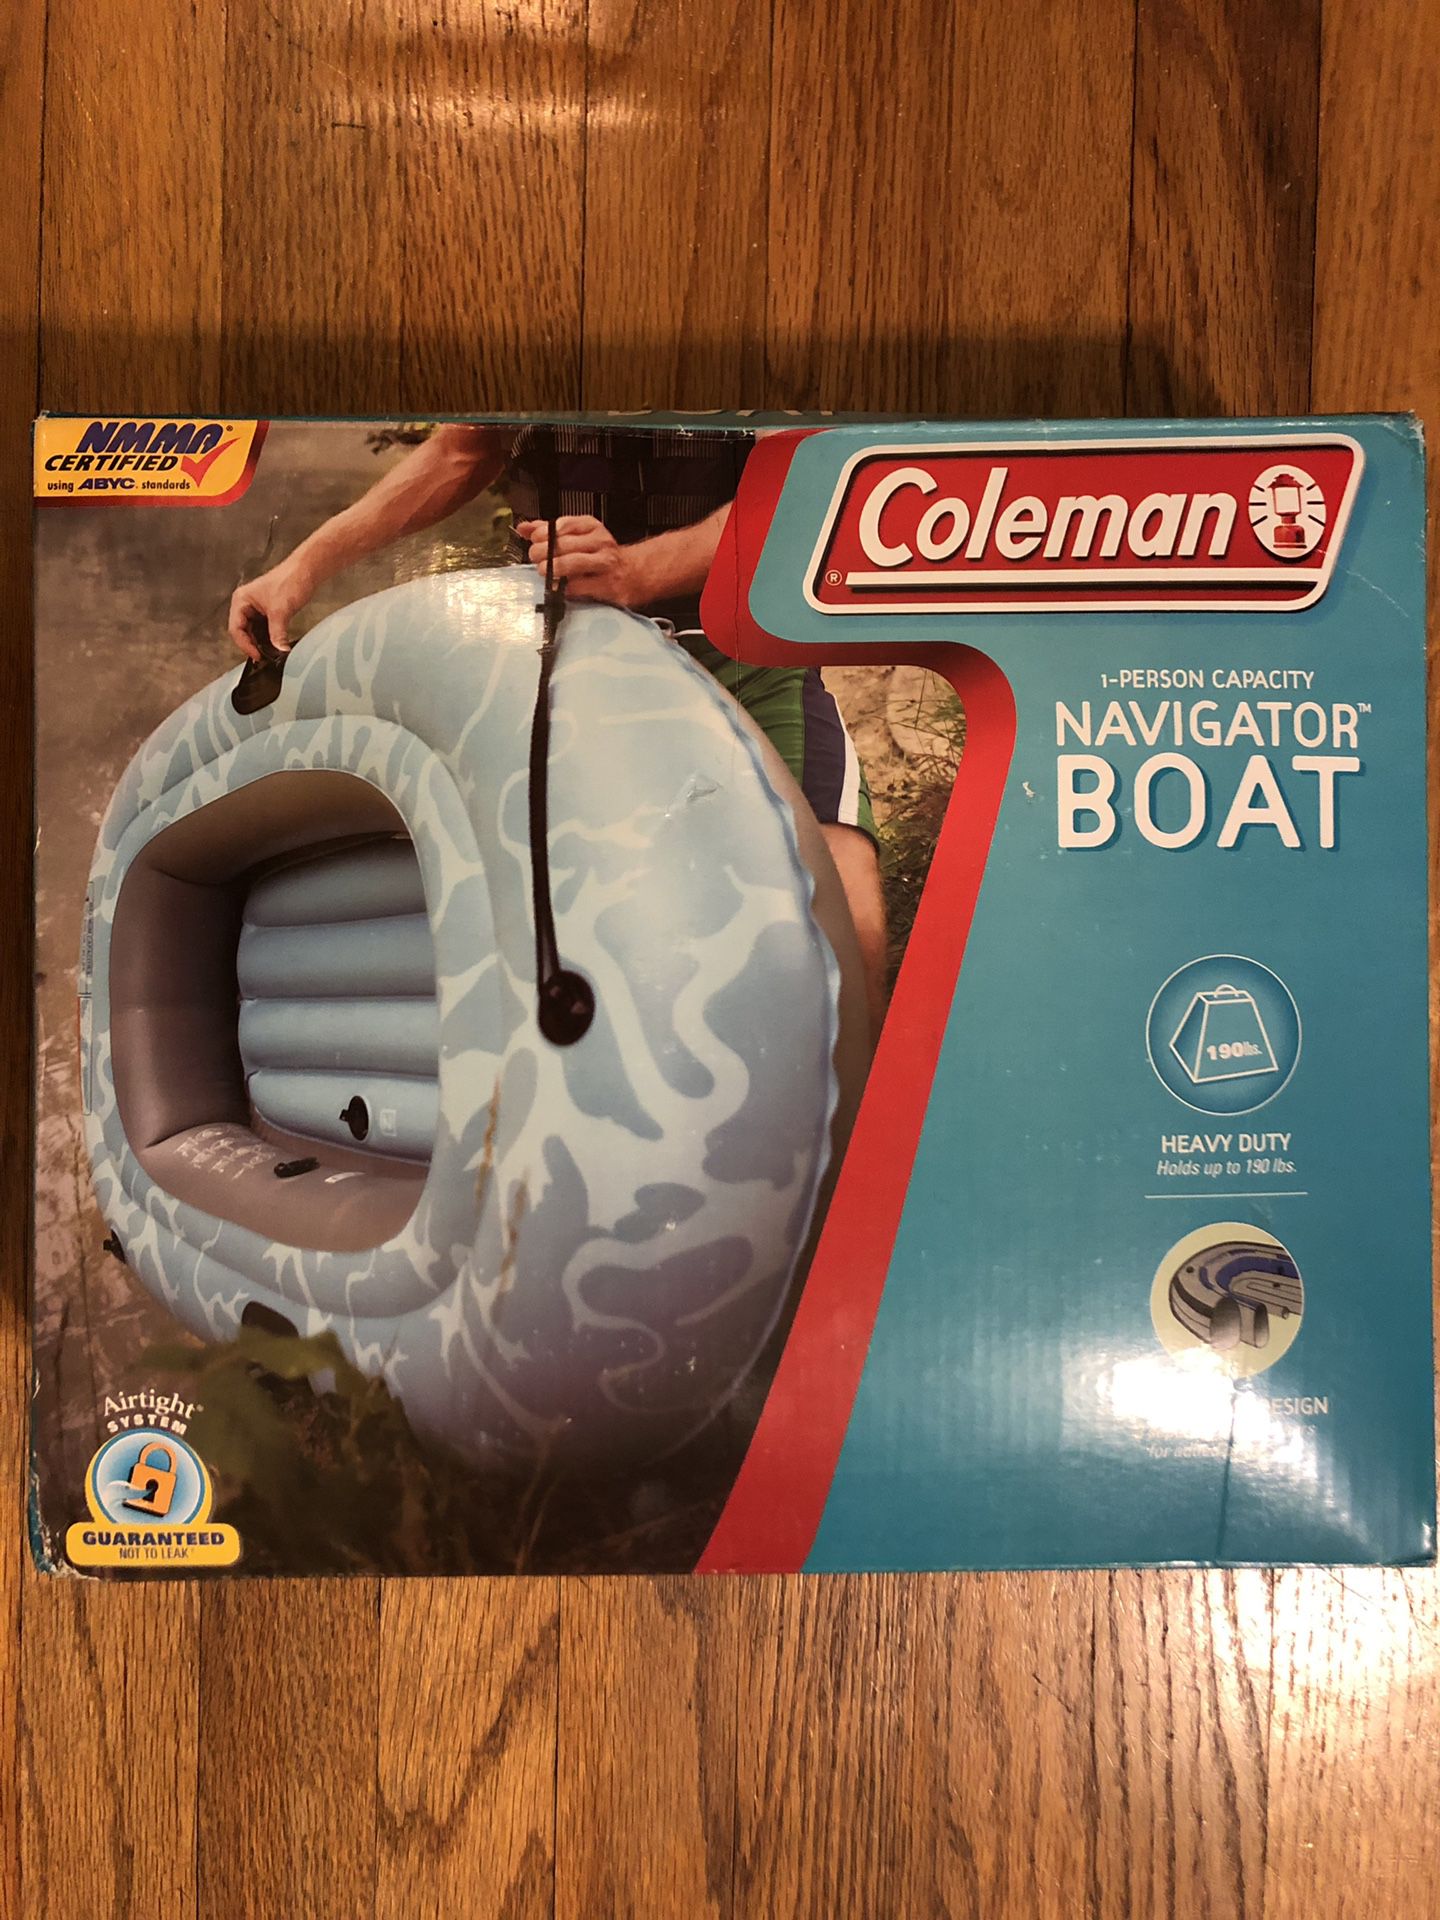 Coleman 1-person inflatable navigator boat